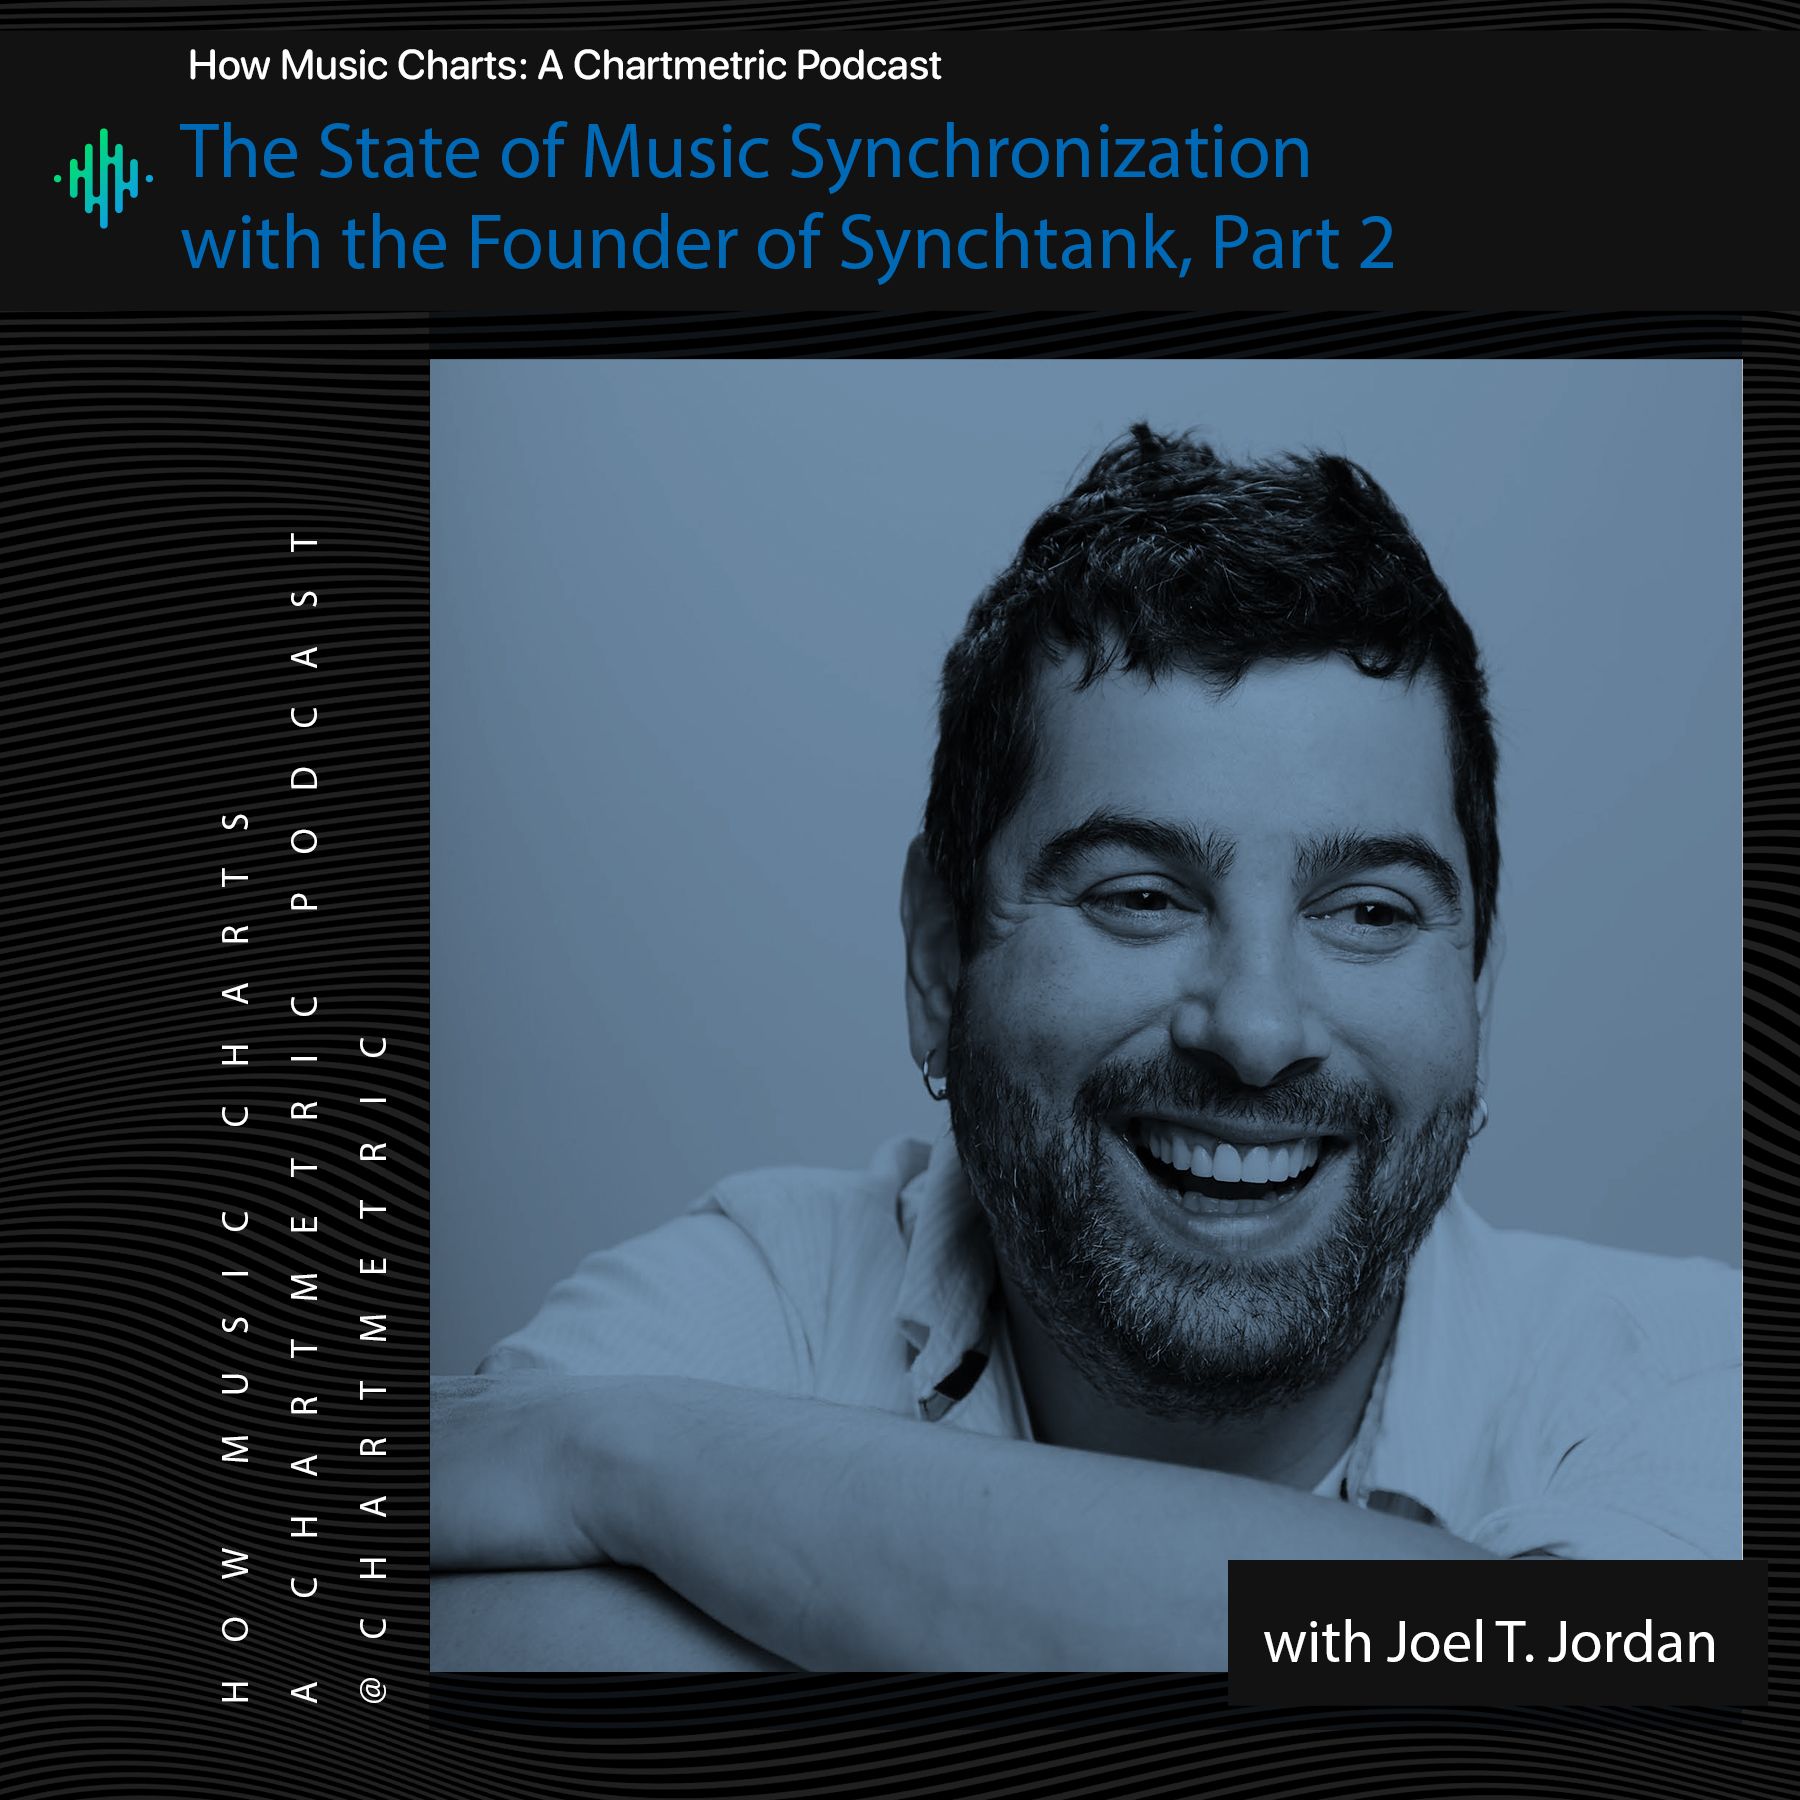 The State of Music Synchronization With Synchtank Founder Joel T. Jordan, Part 2